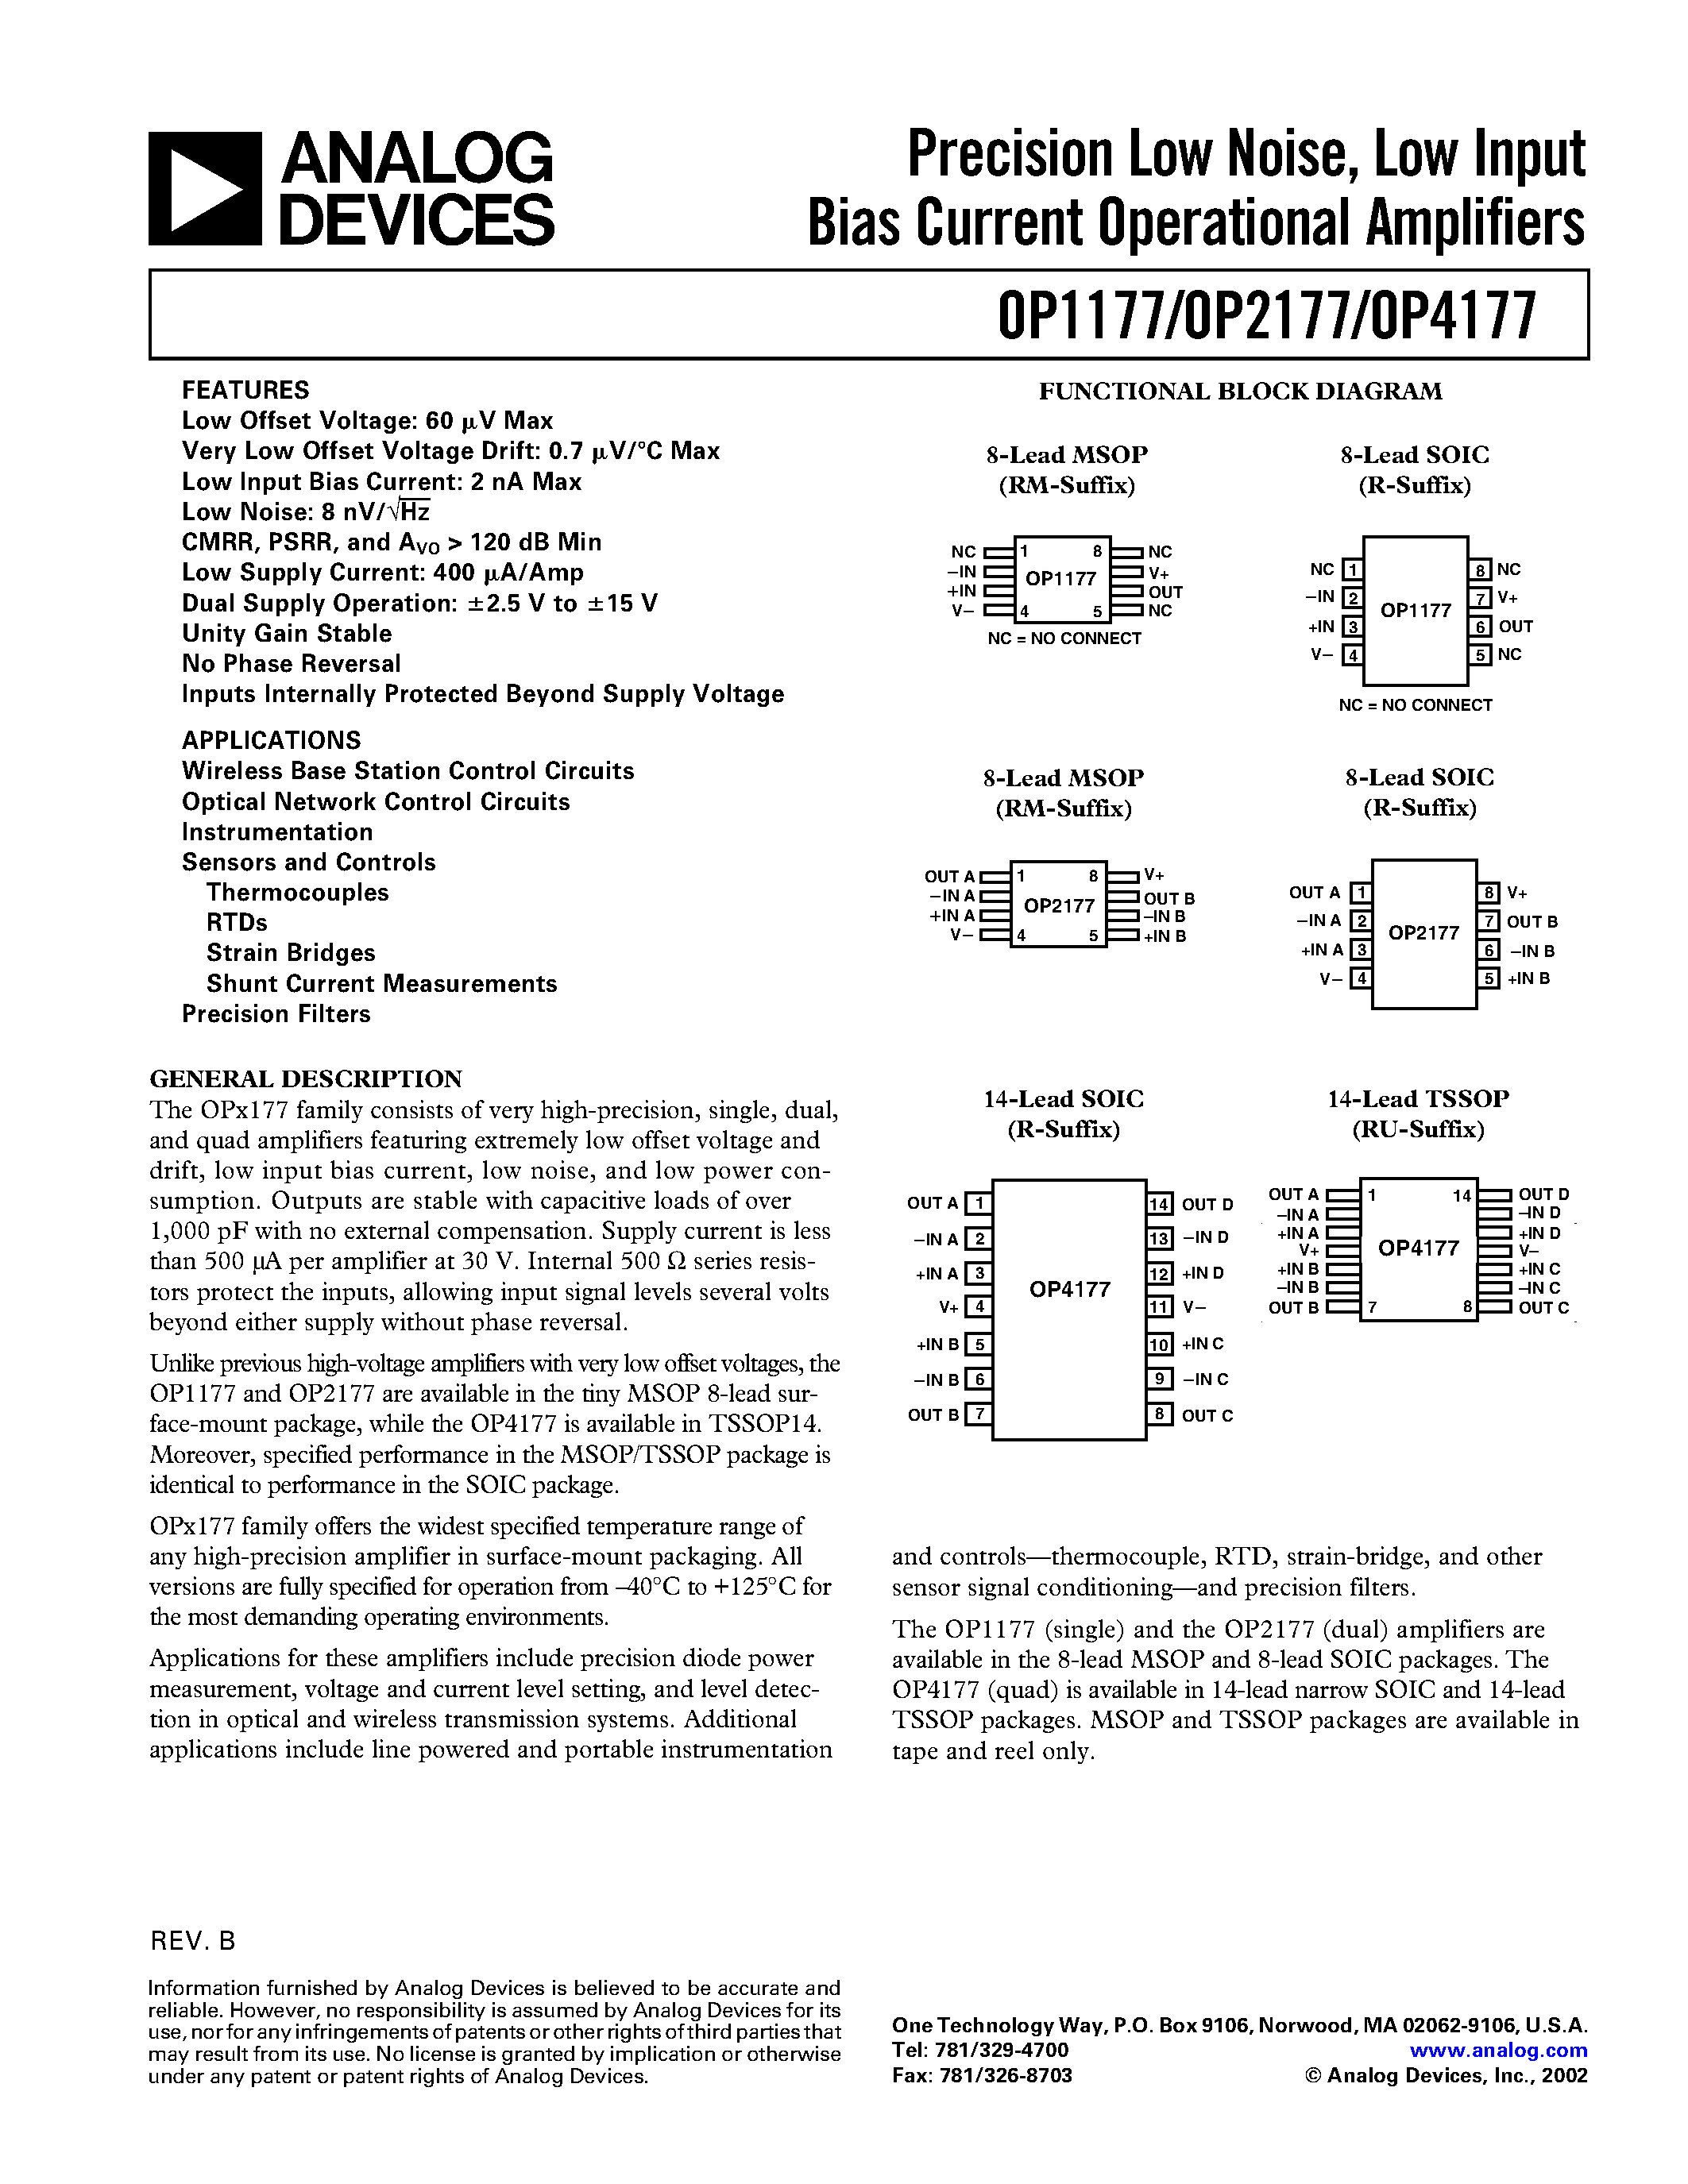 Datasheet OP2177 - Precision Low Noise / Low Input Bias Current Operational Amplifiers page 1